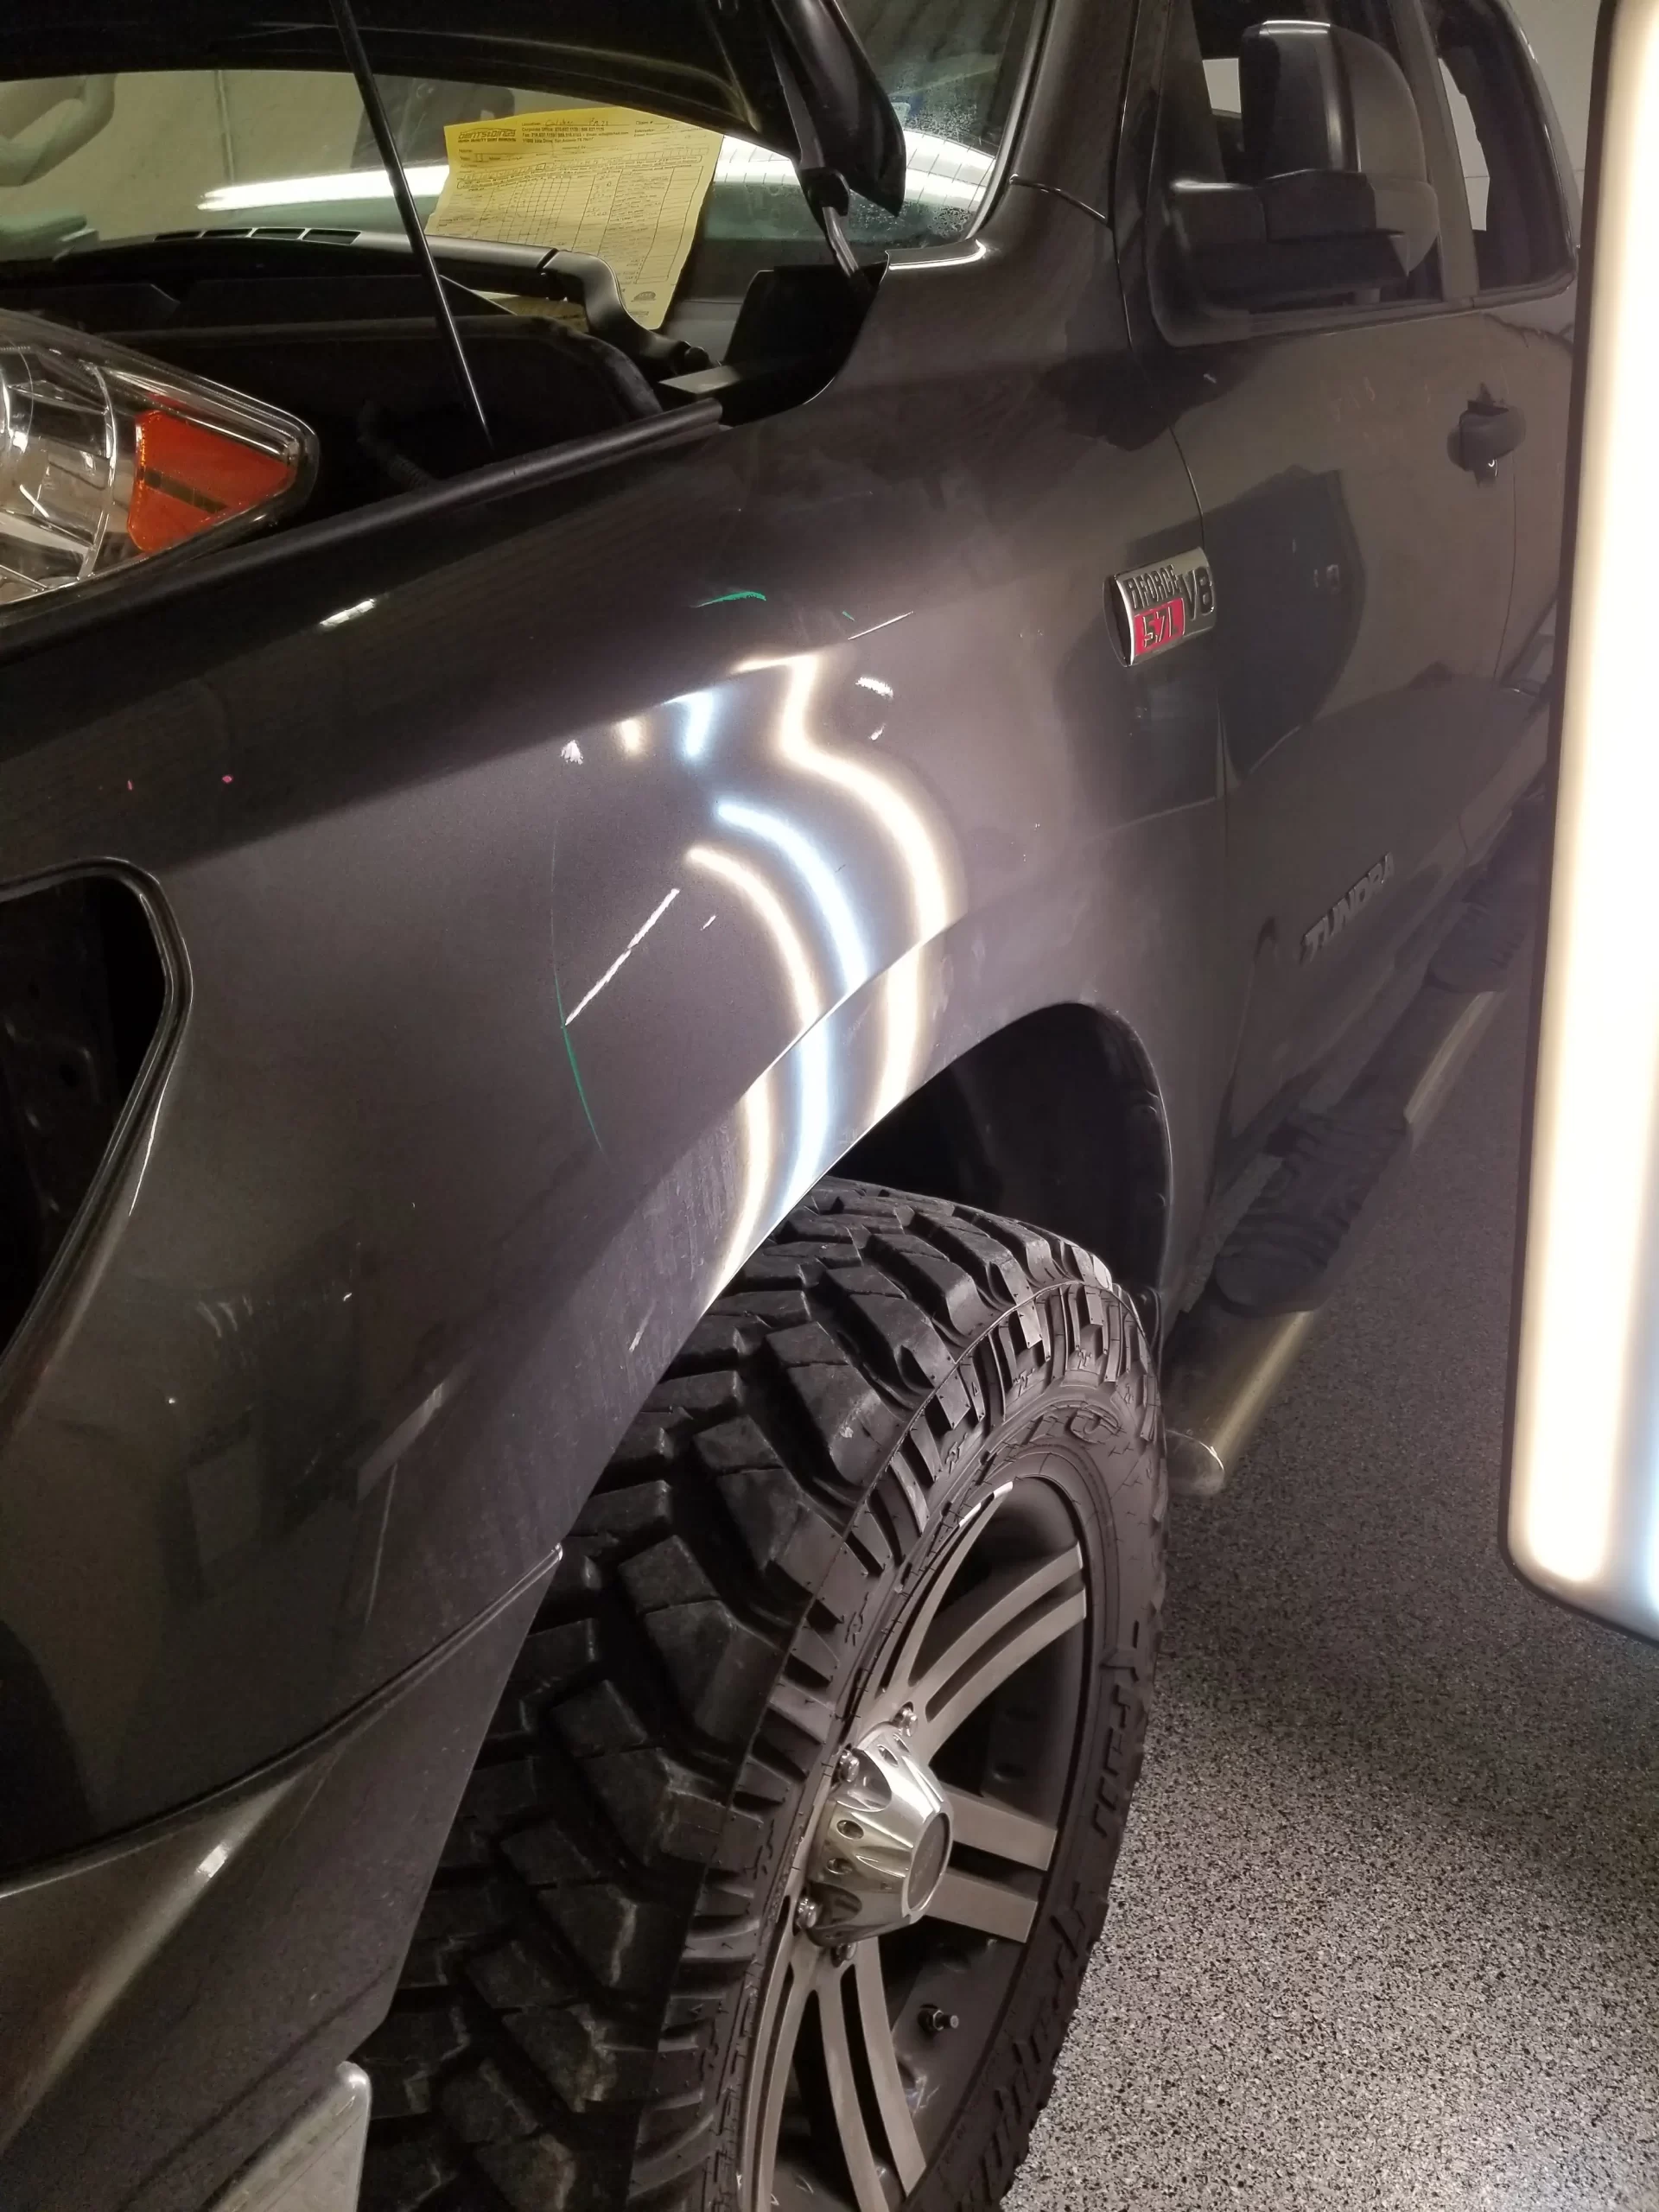 The side of a grey pickup truck is lit up after repairs.